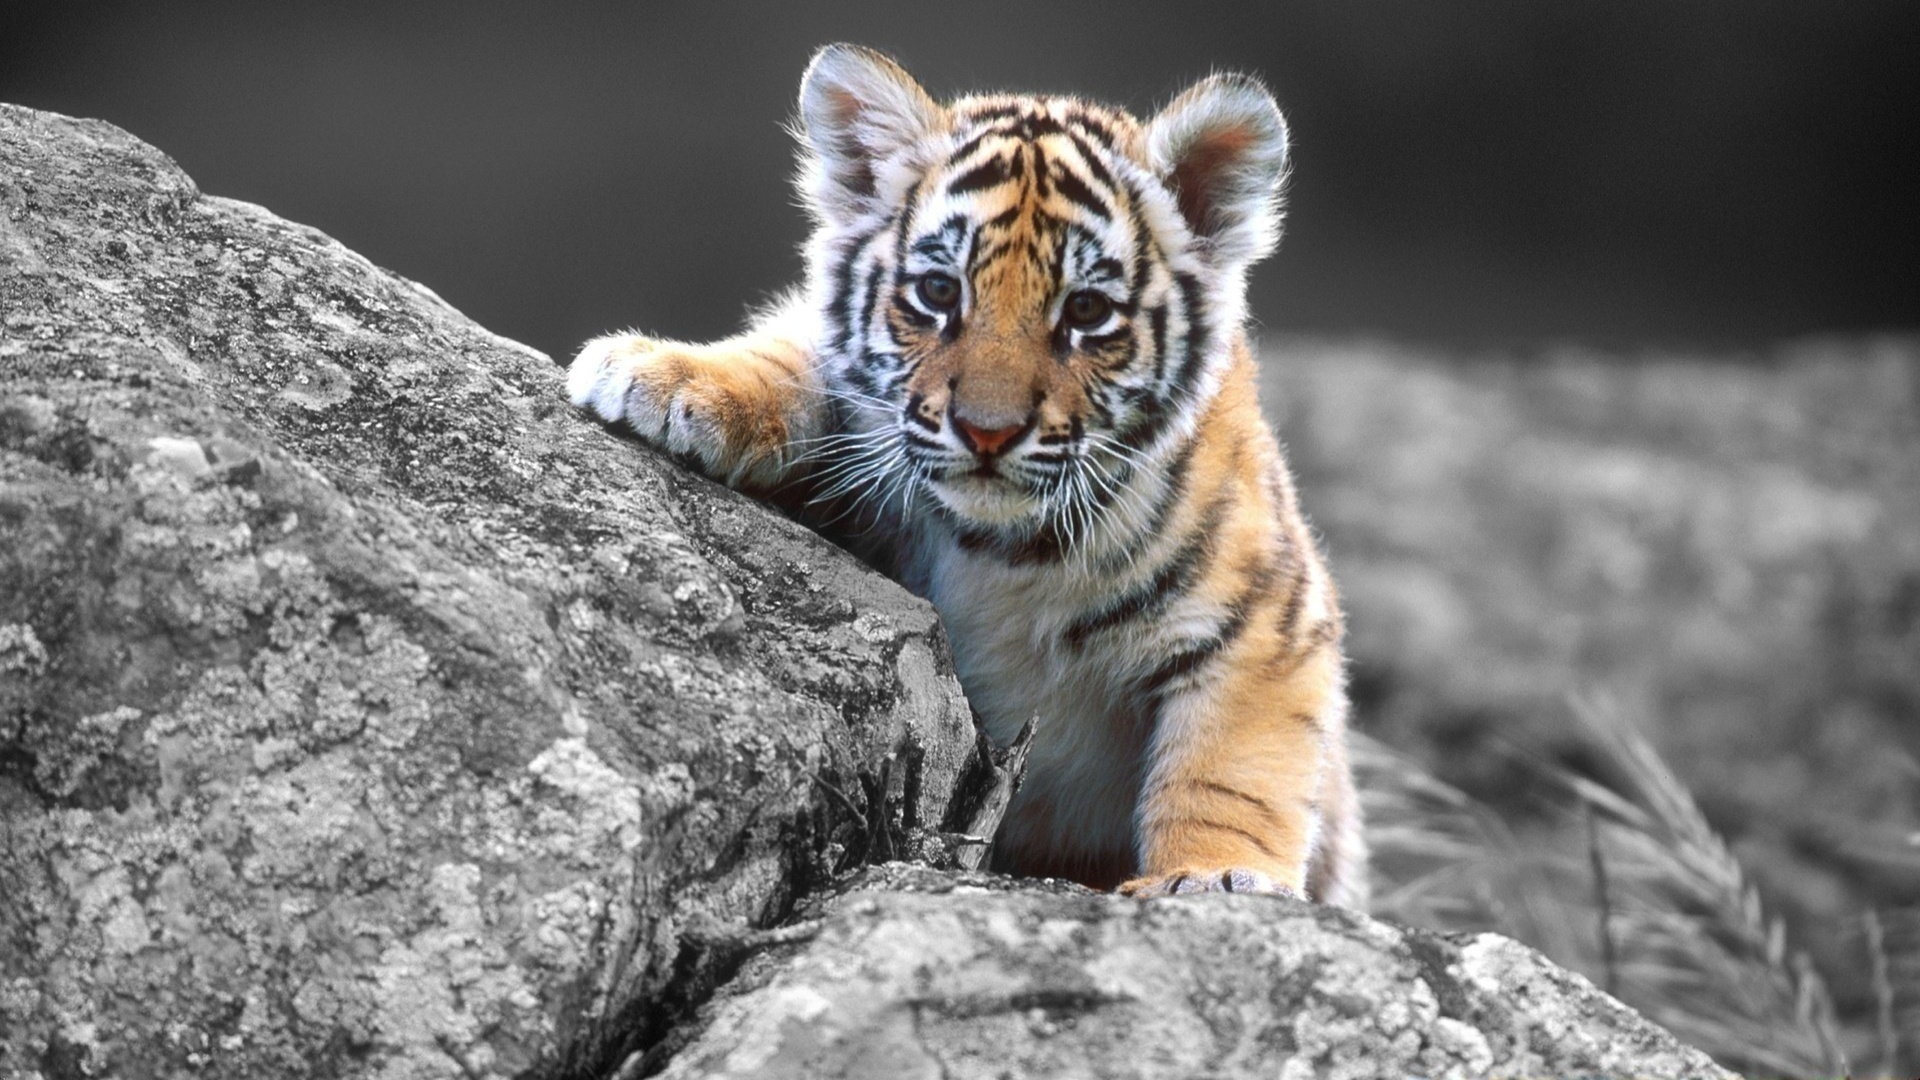 Tiger baby hd wallpapers Desktop Backgrounds for Free HD